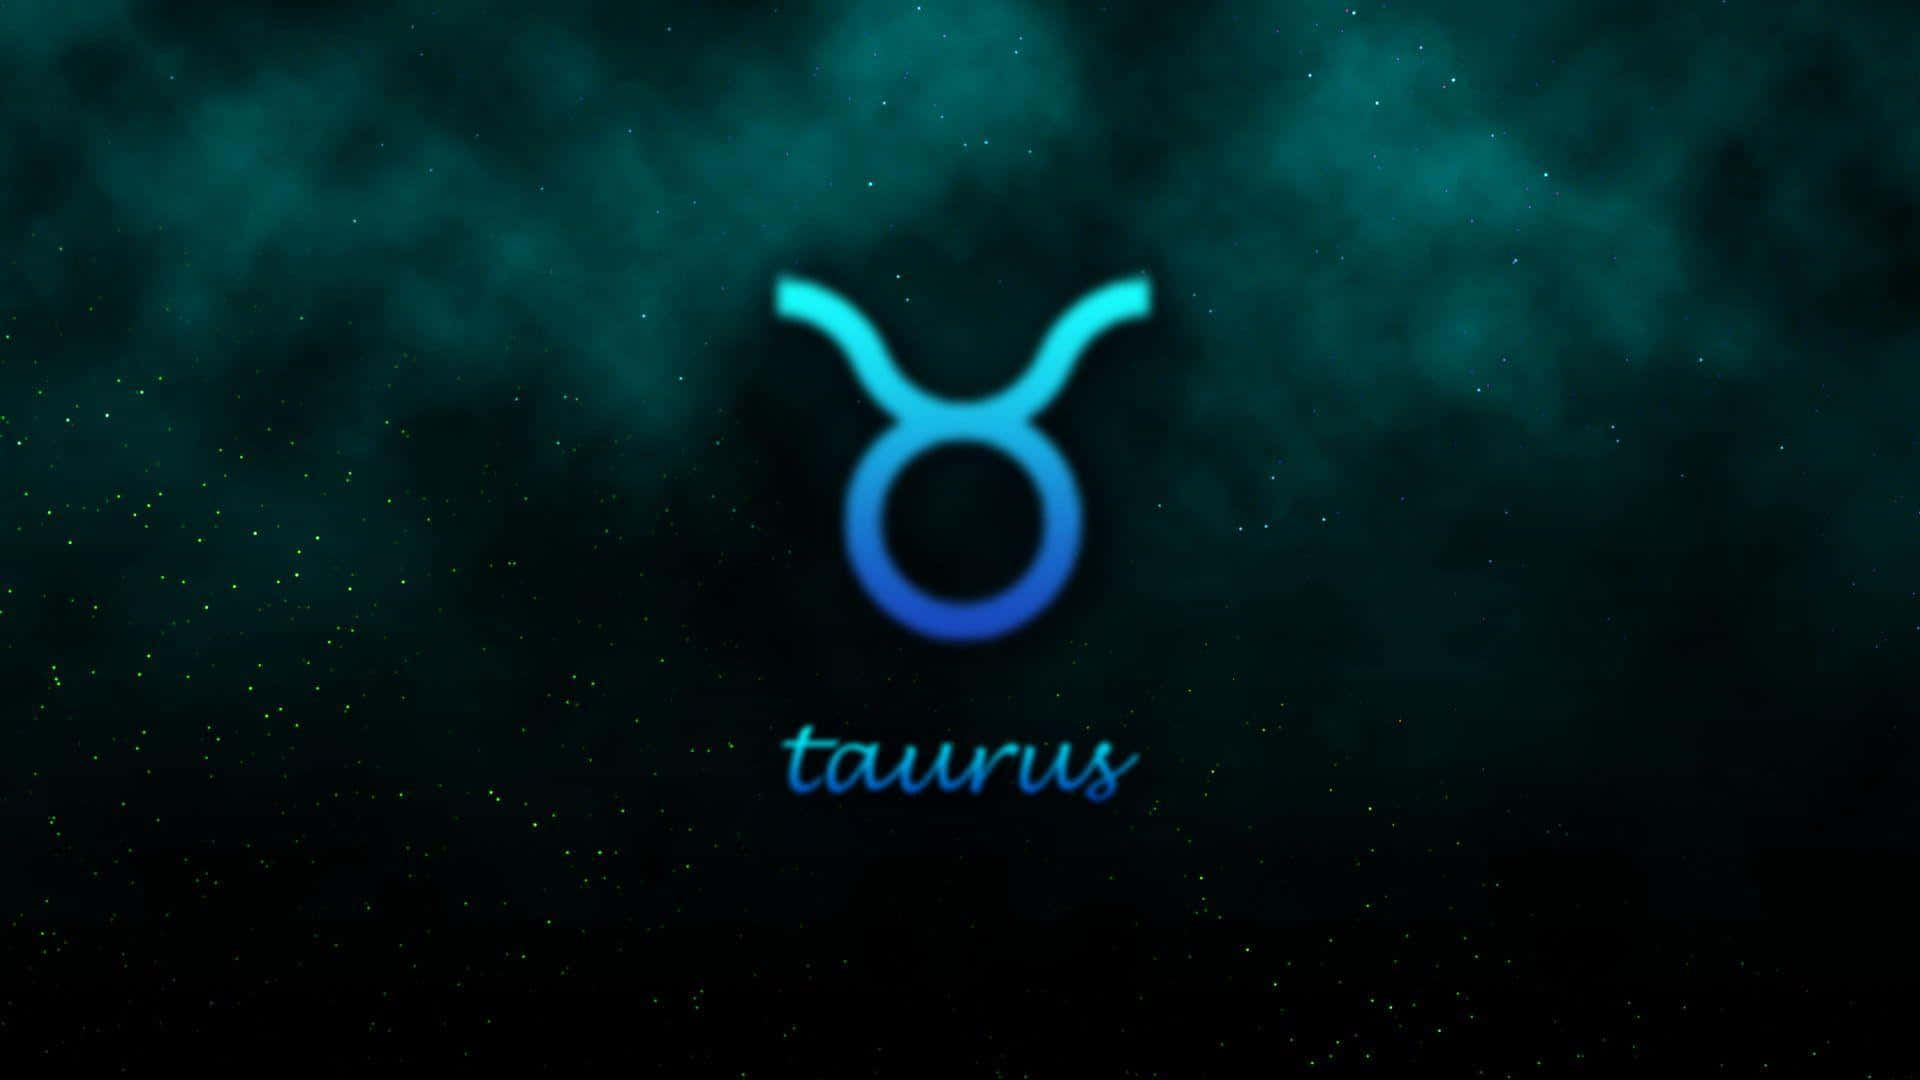 Your Astrological Sign: Taurus"